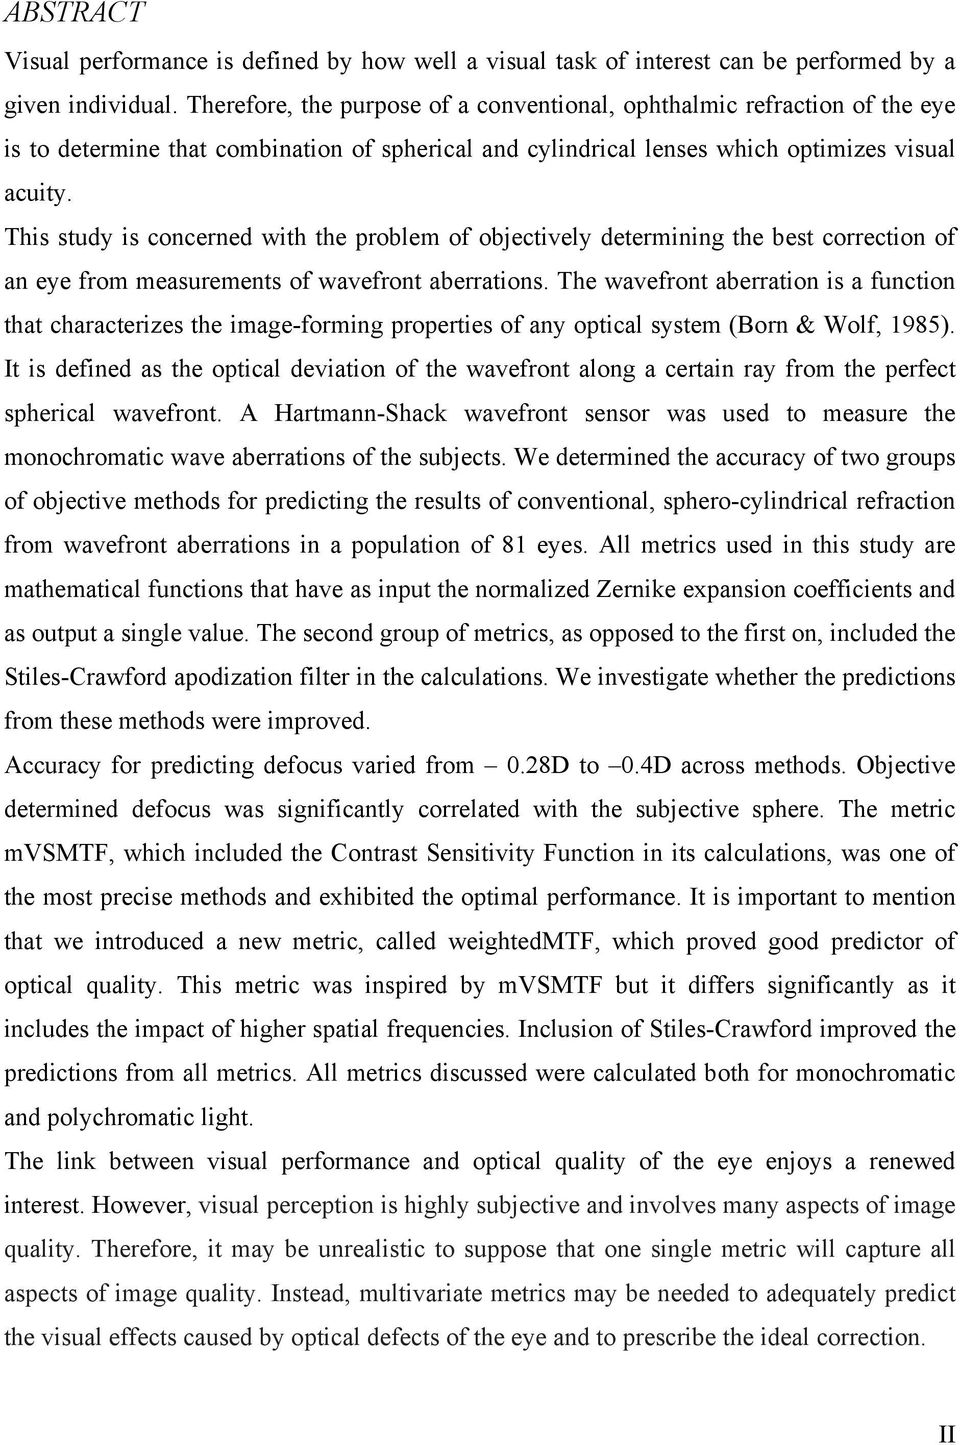 This study is concerned with the problem of objectively determining the best correction of an eye from measurements of wavefront aberrations.